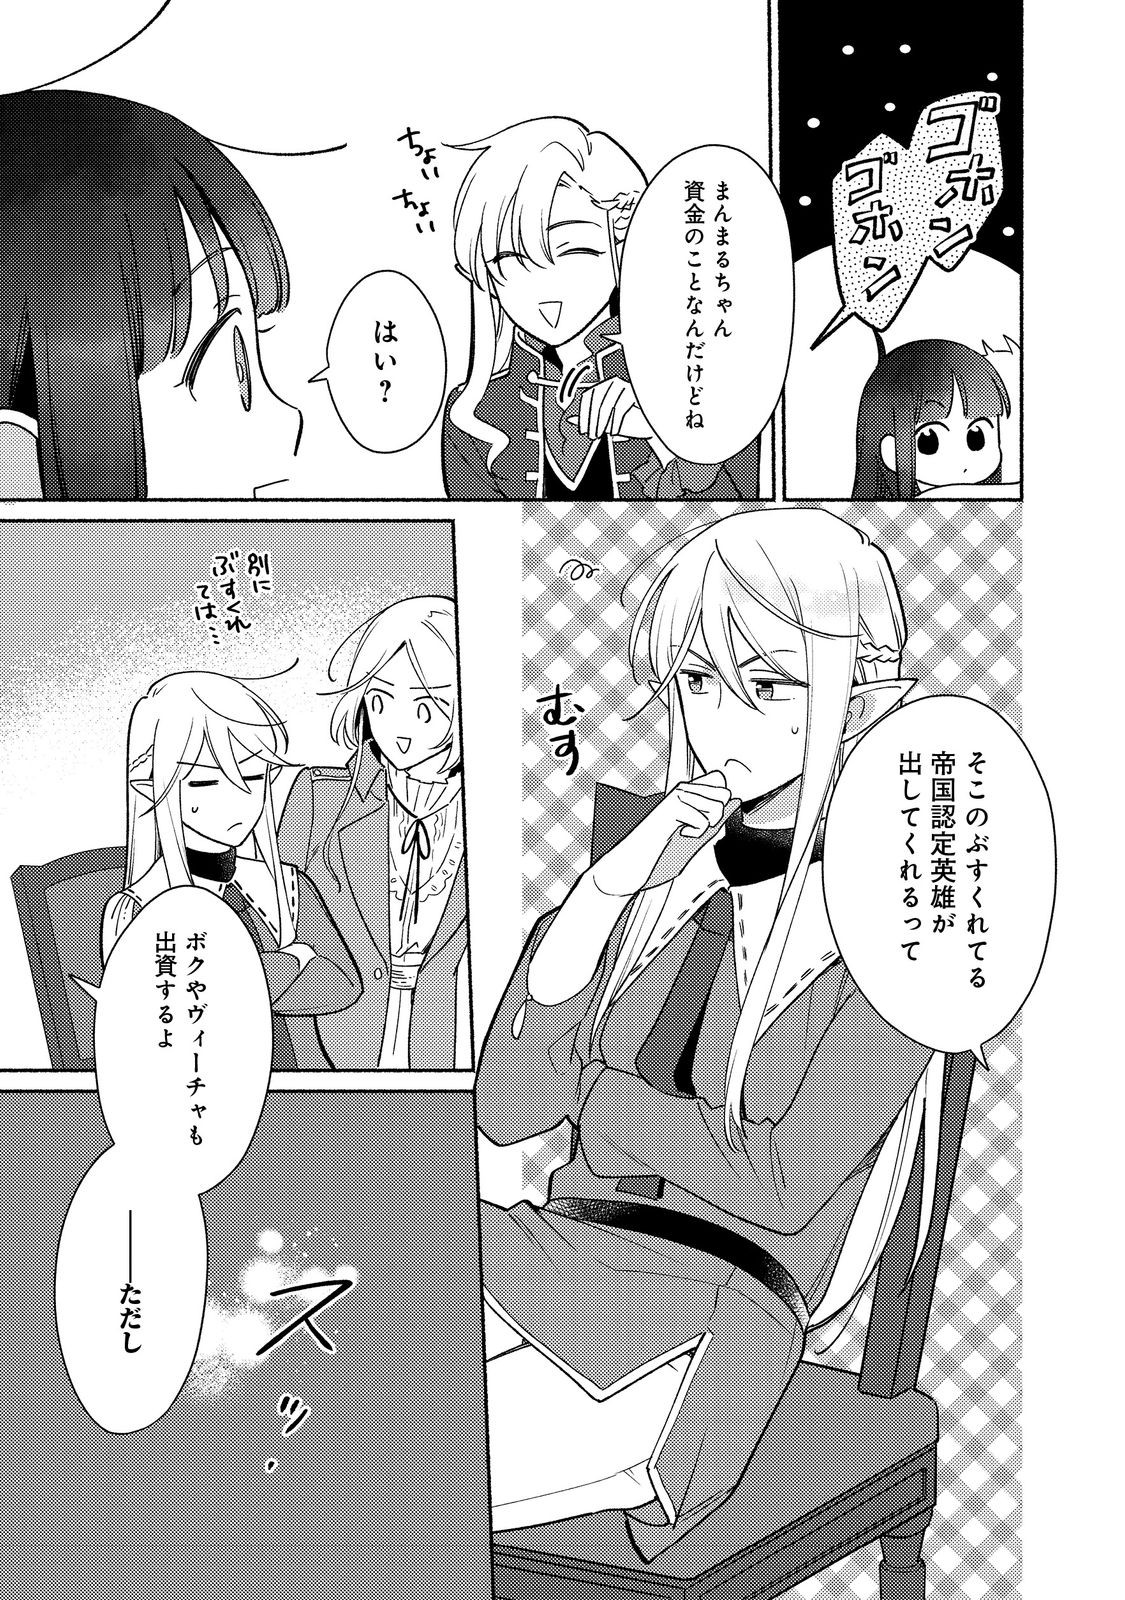 I’m the White Pig Nobleman 第20.2話 - Page 8